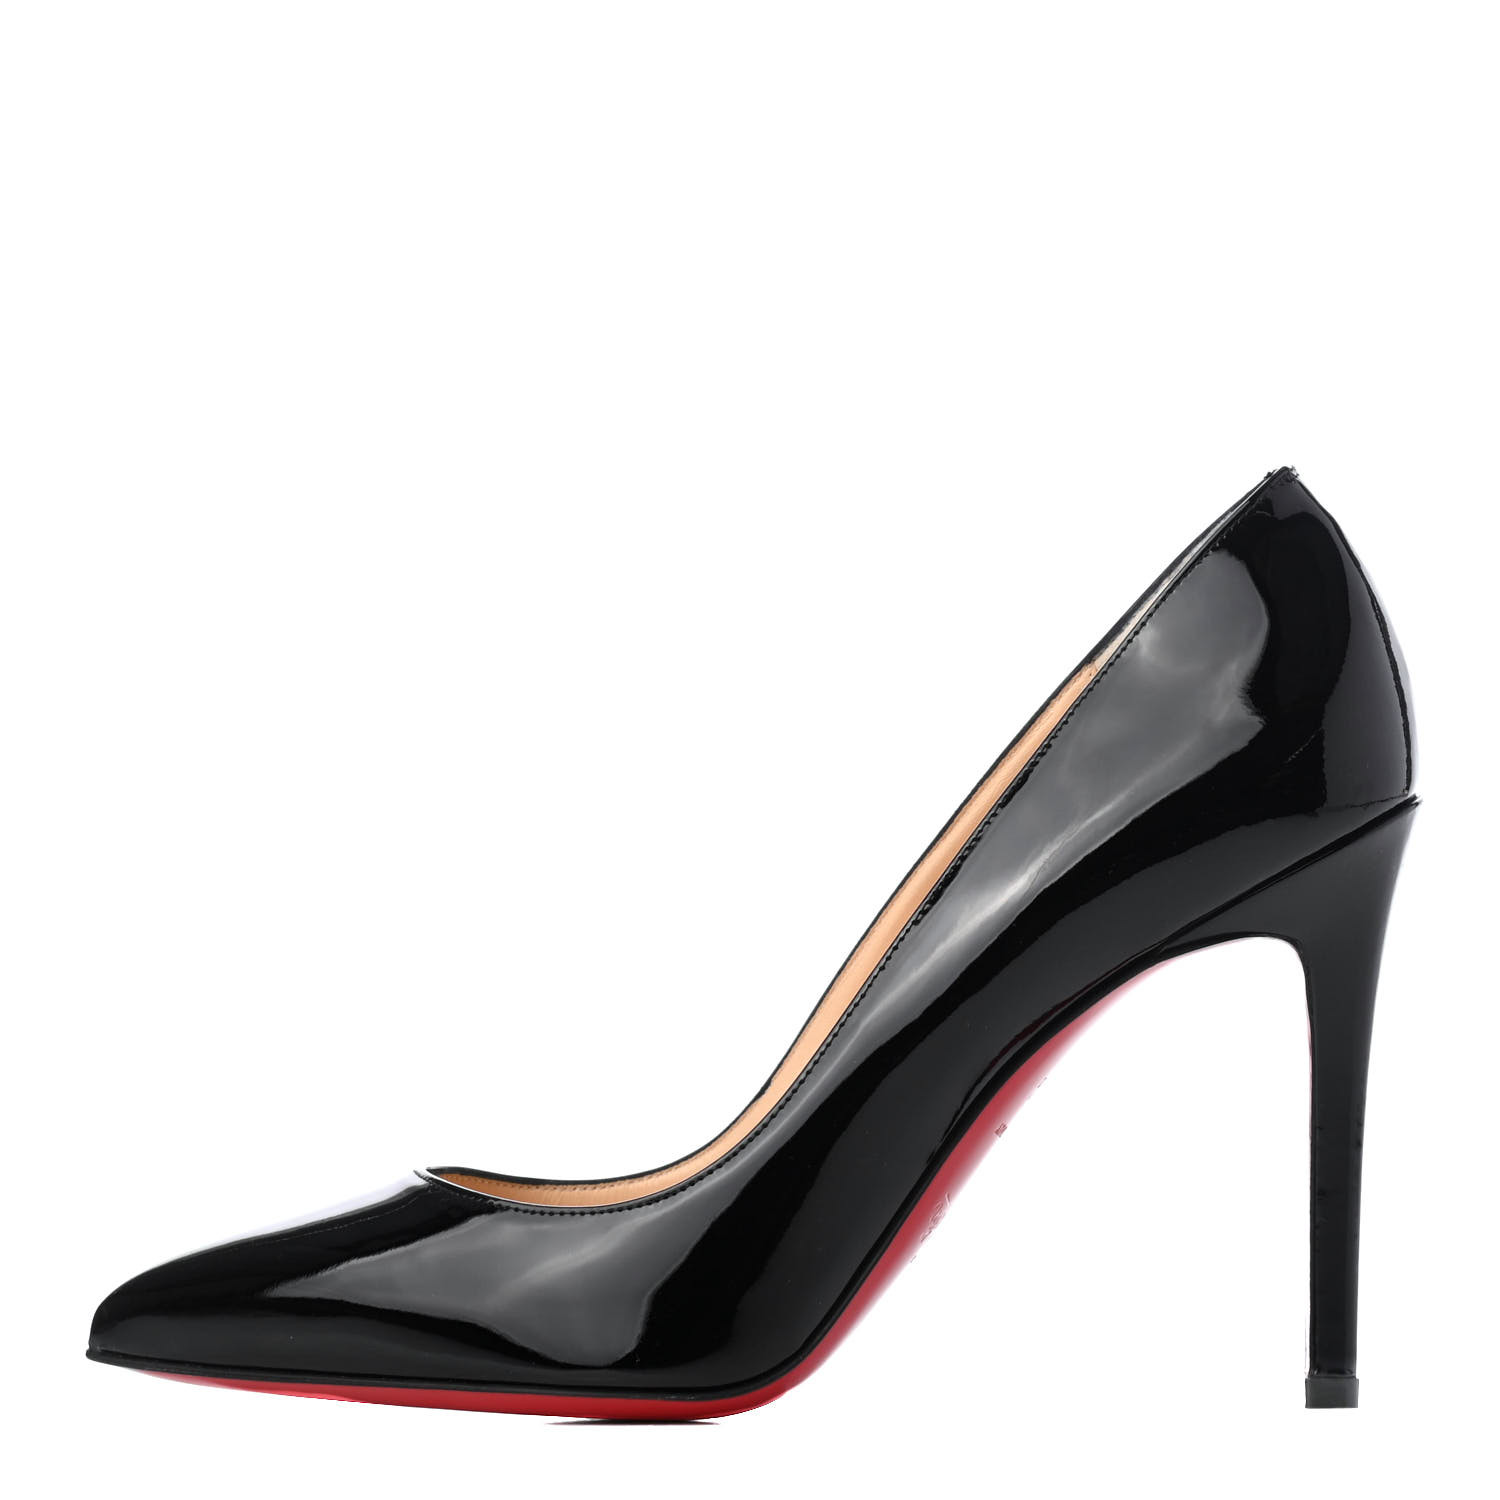 pigalle 100 louboutin